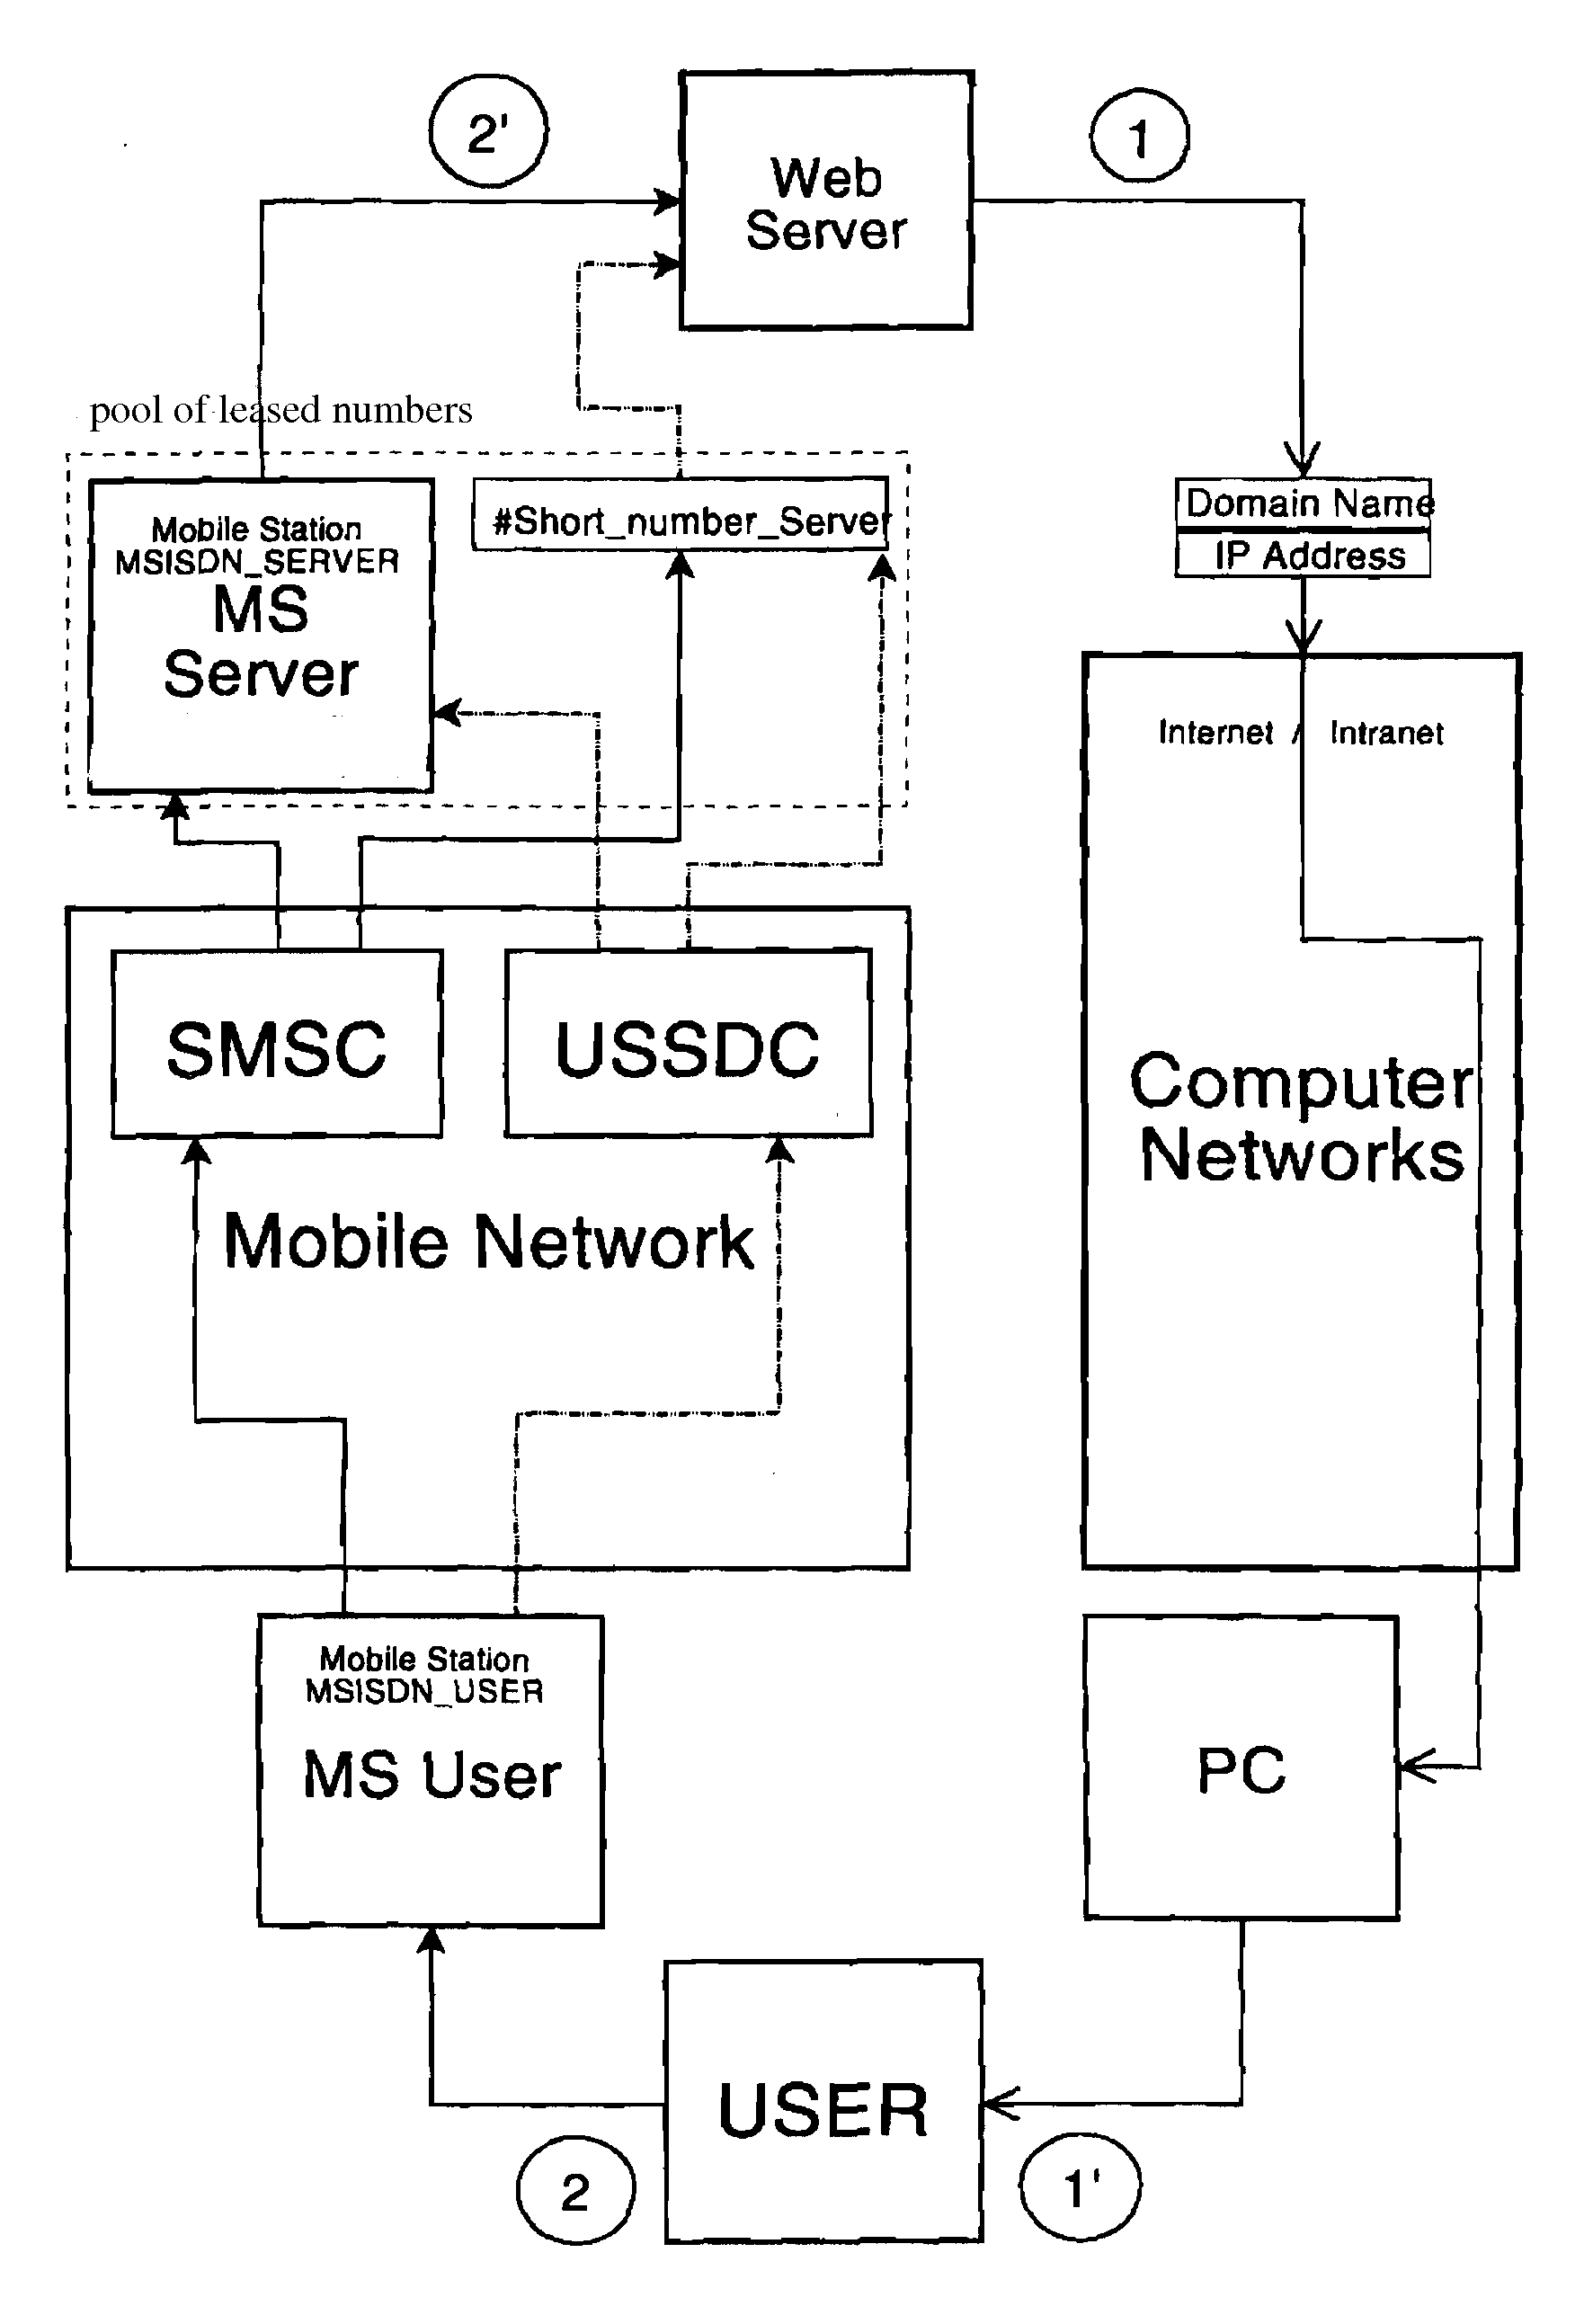 Process of remote user authentication in computer networks to perform the cellphone-assisted secure transactions